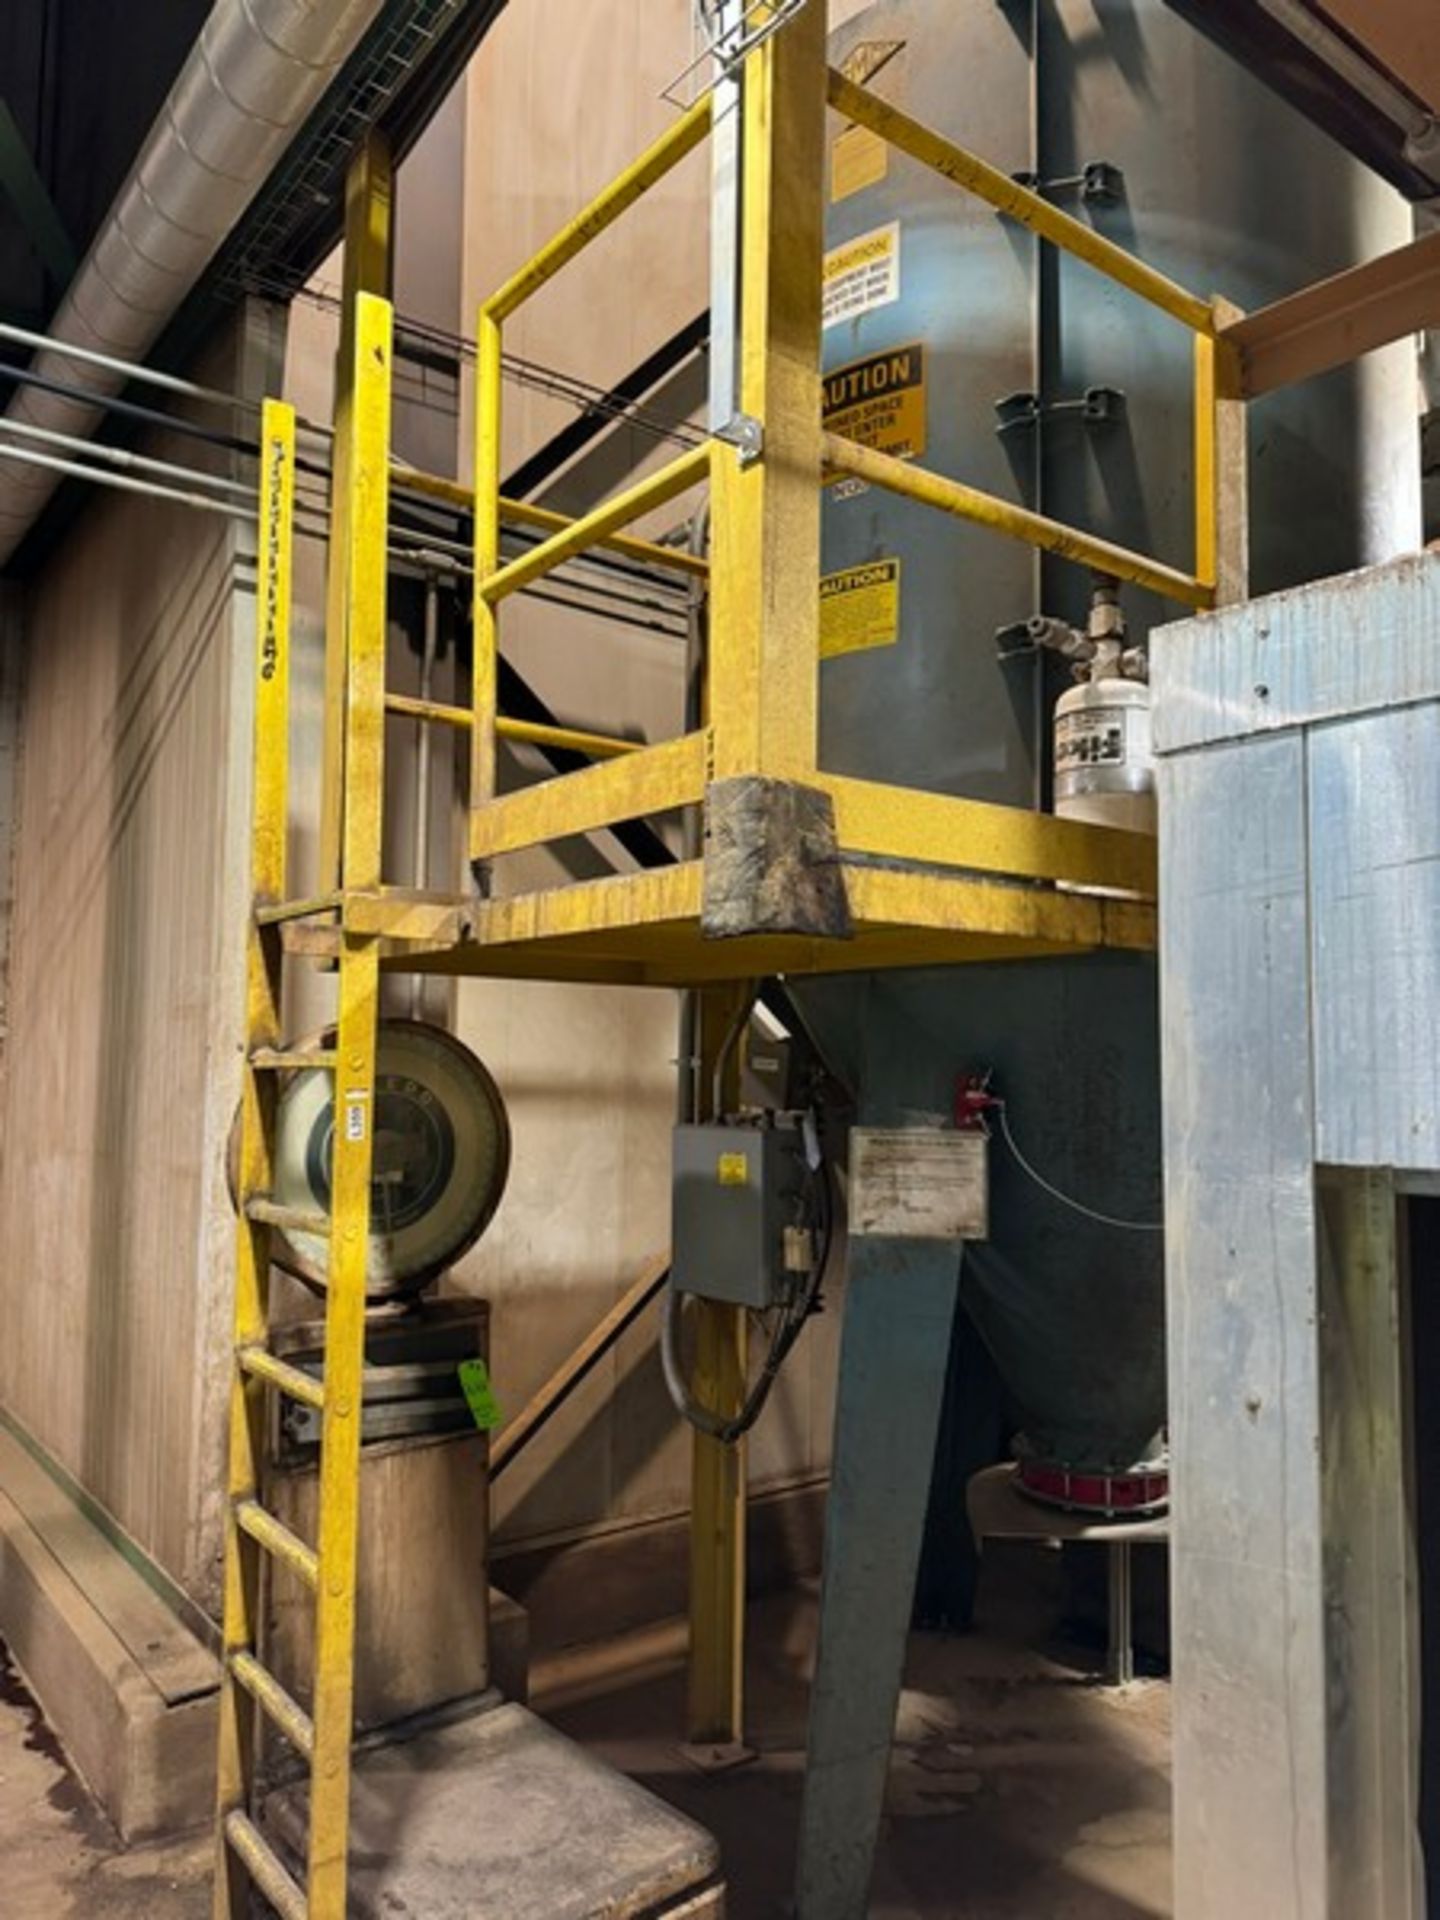 SENCO Dust Collector, M/N DCT-460, S/N 2-75, Includes the Platform & Ladder, with NYB Explosion - Image 15 of 16